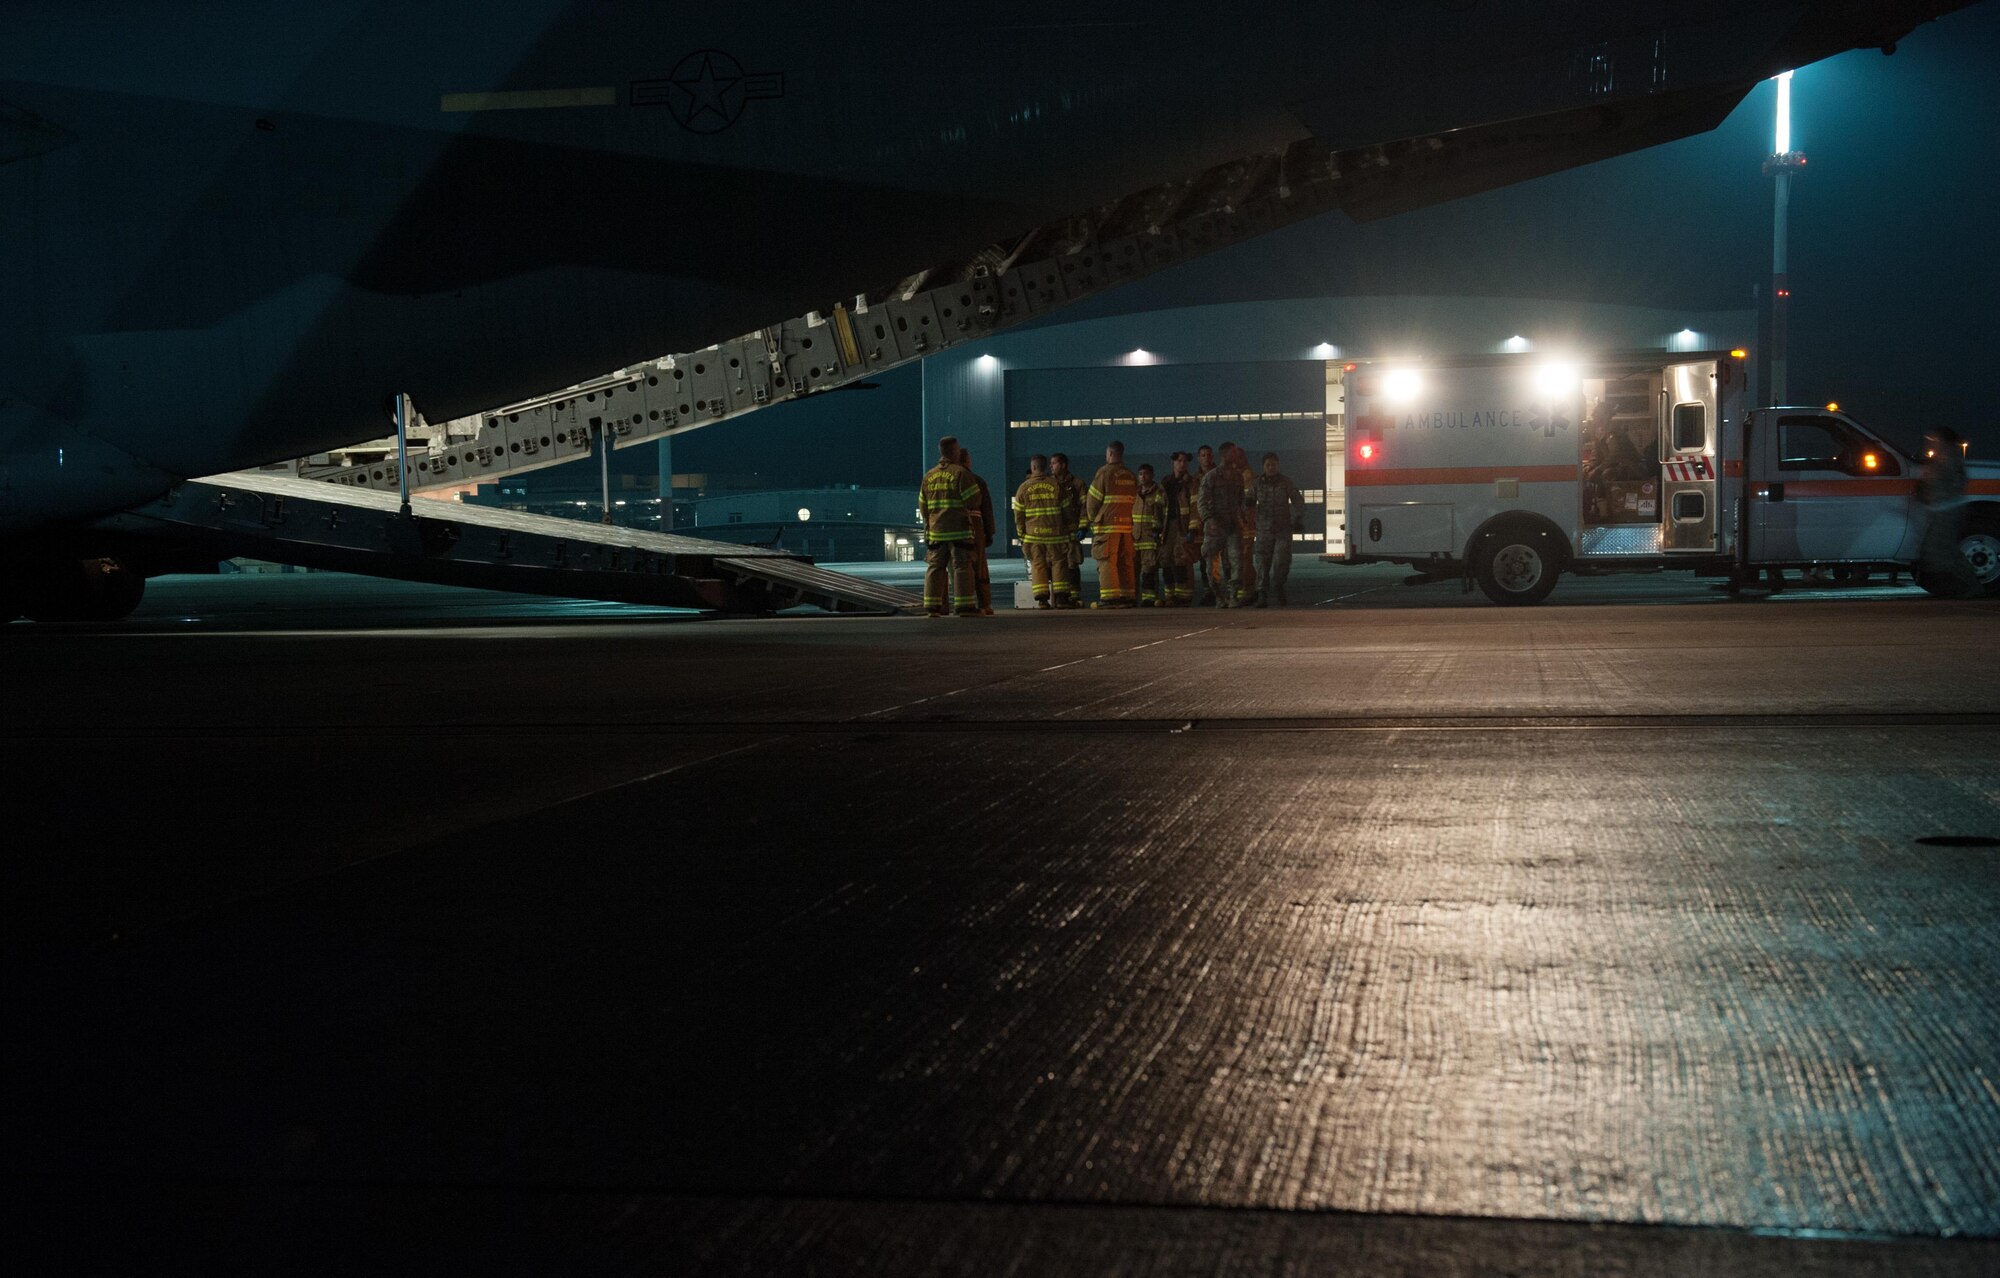 Firefighters and medical personnel standby to assist in the transport of a patient during an aeromedical evacuation mission on Aug. 9, 2015, at Ramstein Air Base, Germany. The personnel assisting in the mission were from the 86th Civil Engineer Squadron, Kaiserslautern Military Community Fire Emergency Services and personnel from the 10th Aeromedical Evacuation Operations Team and 455th Expeditionary Aeromedical Evacuation Squadron from Bagram Airfield, Afghanistan. (U.S. Air Force photo/Staff Sgt. Leslie Keopka)